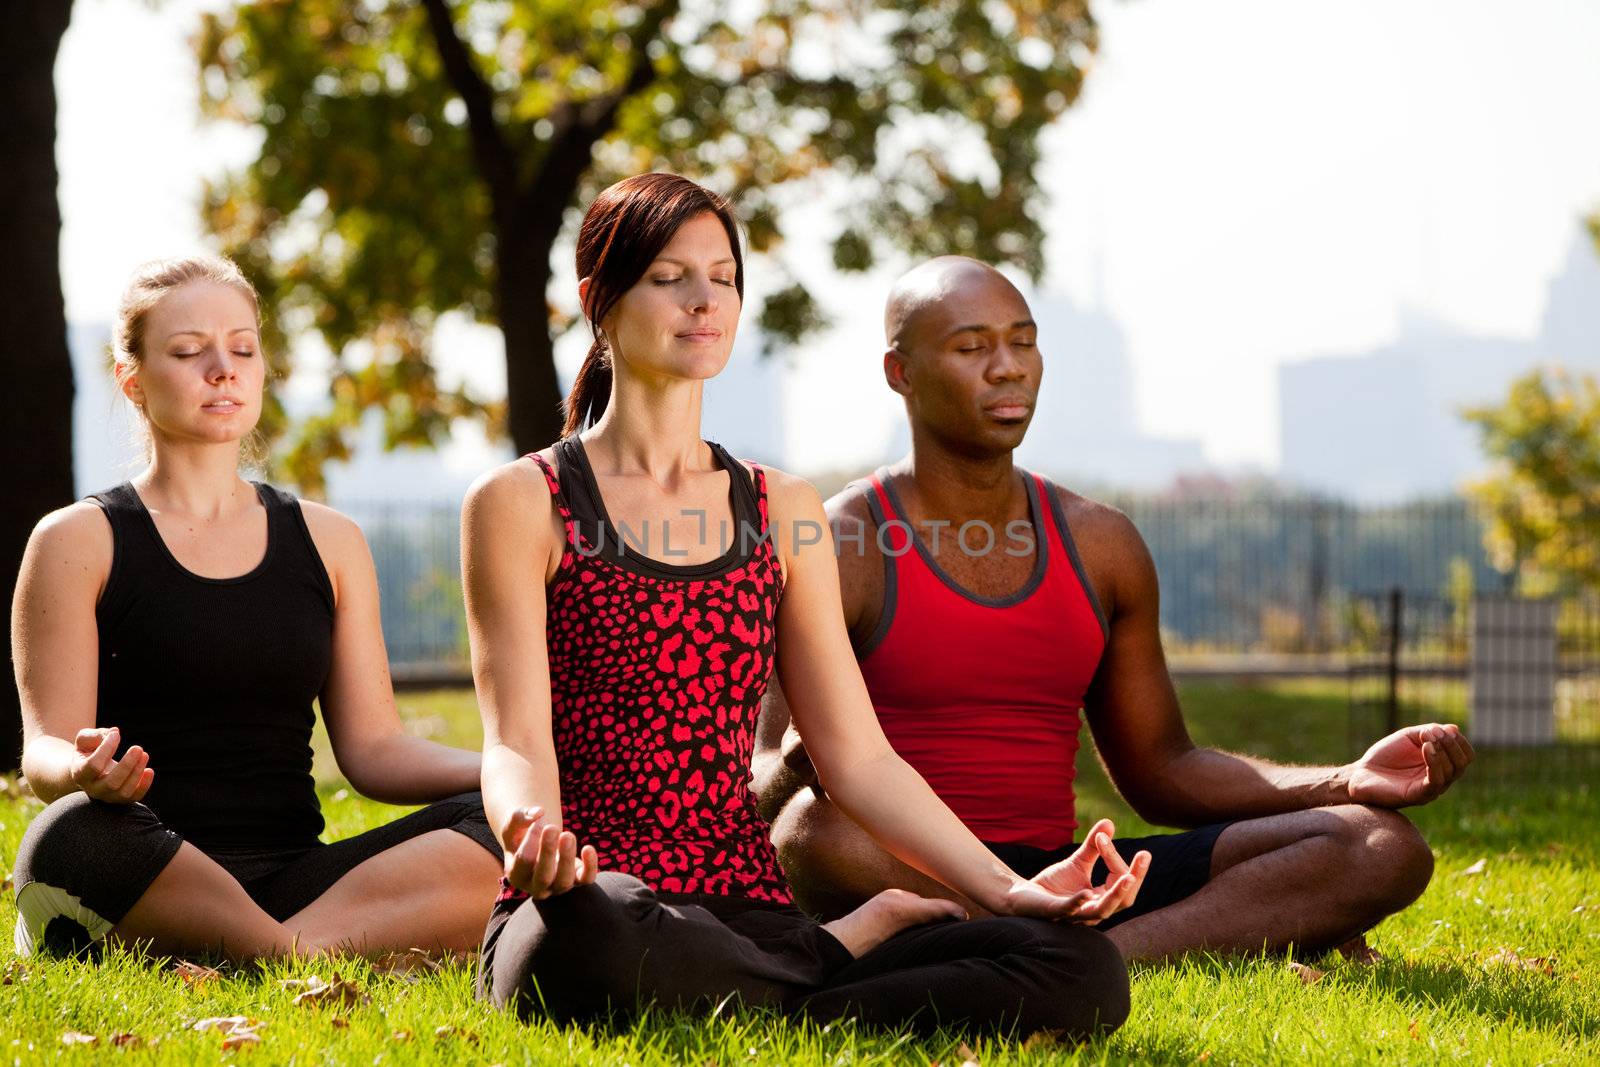 A group of people doing yoga in a city park